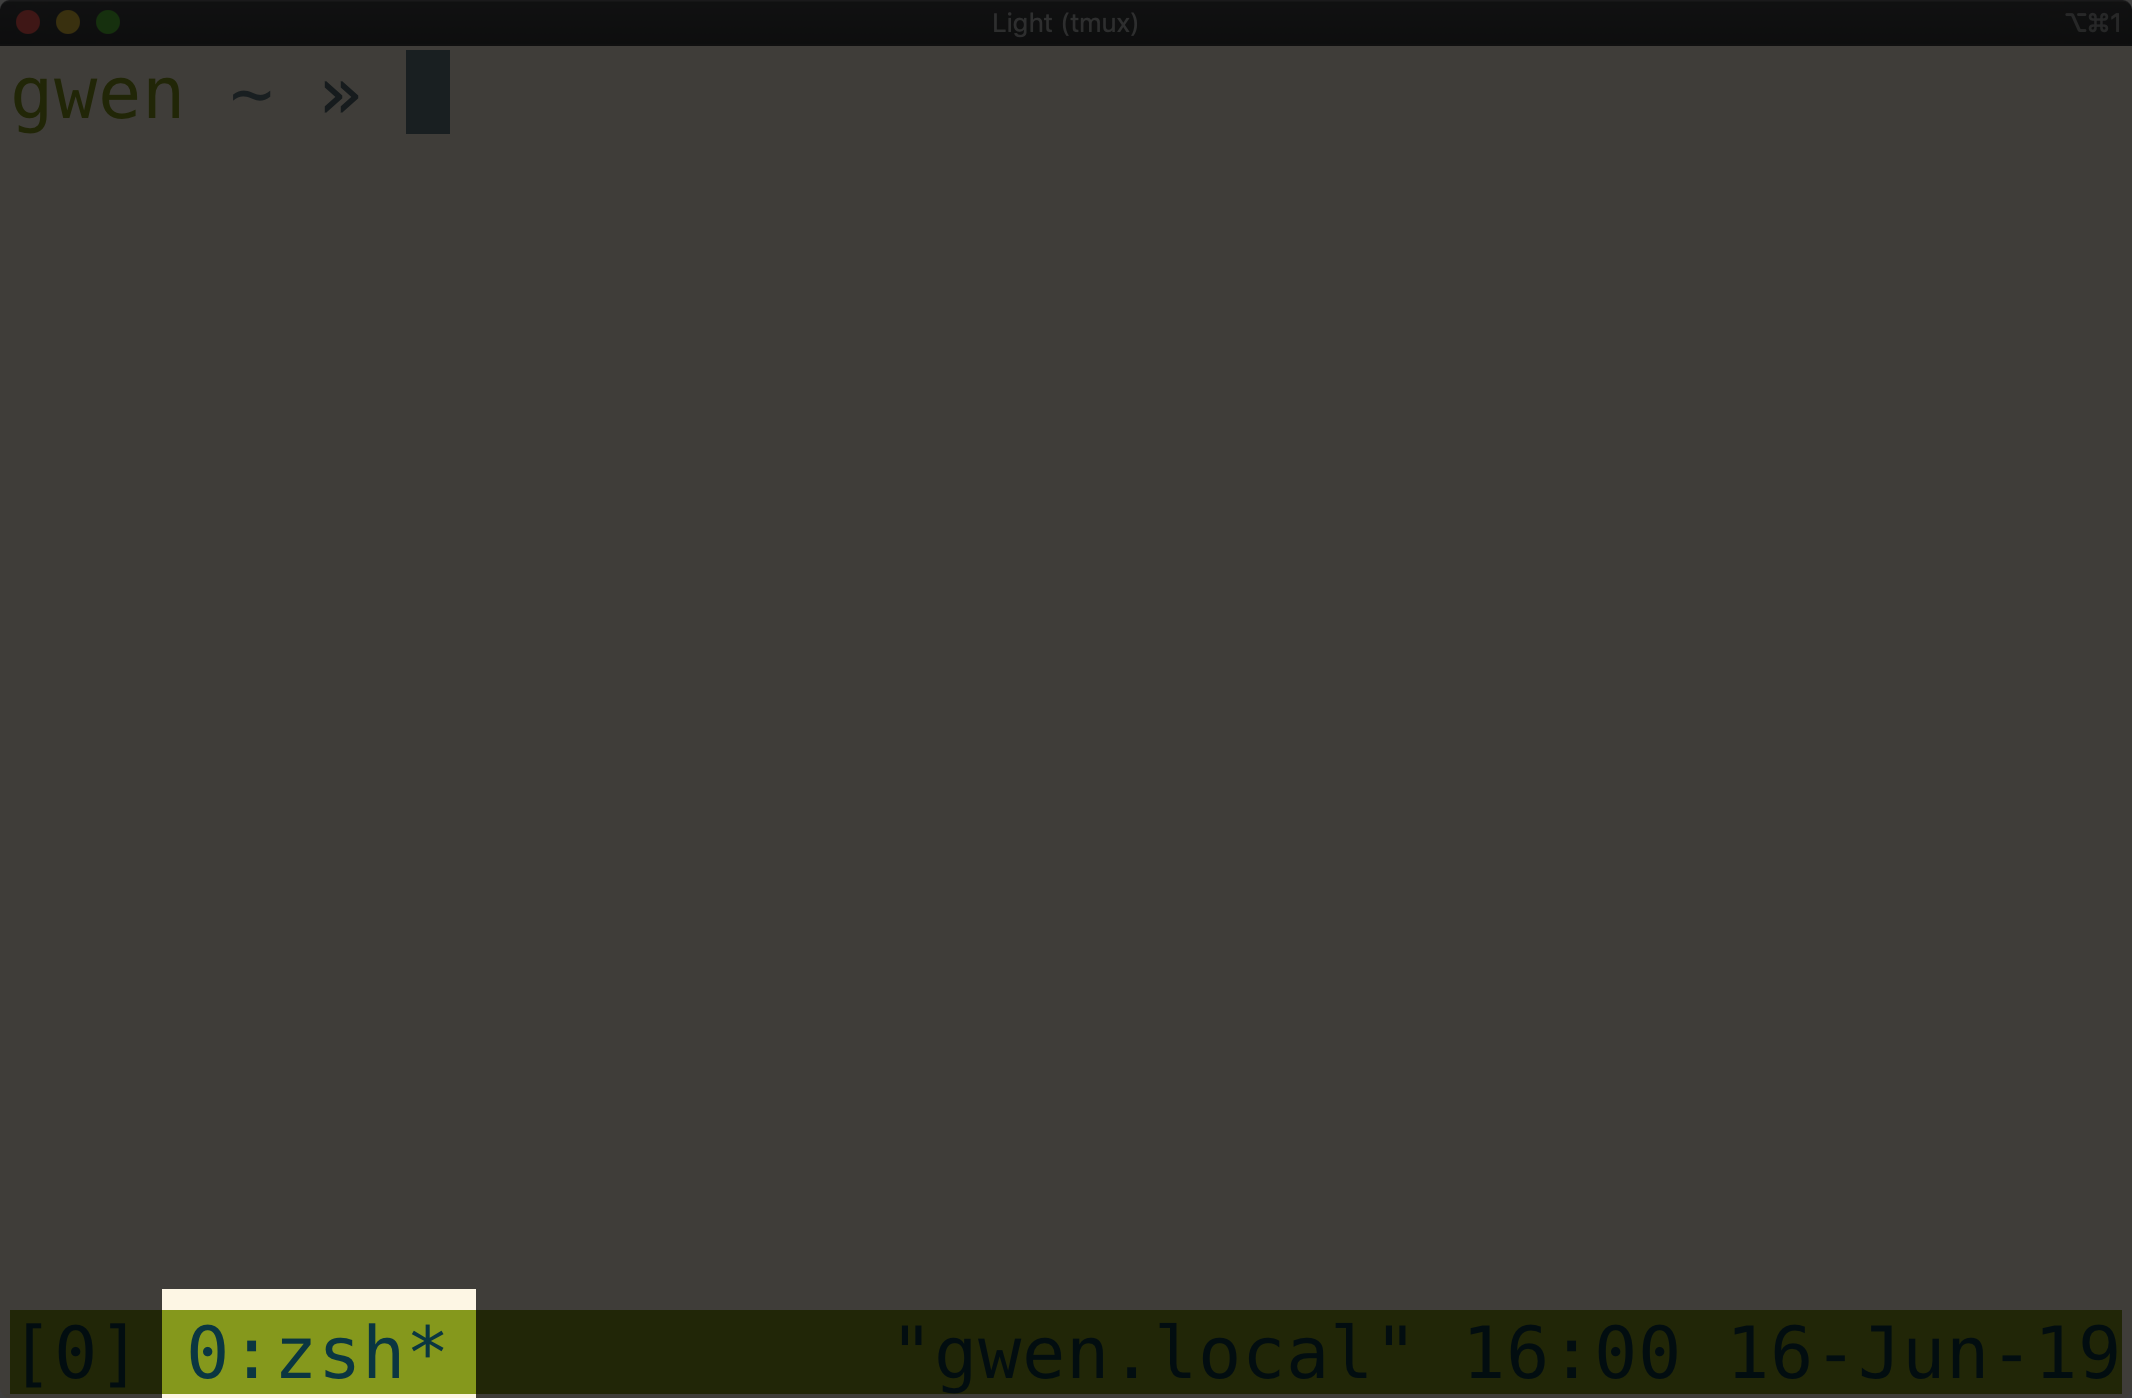 Tmux window with window information highlighted